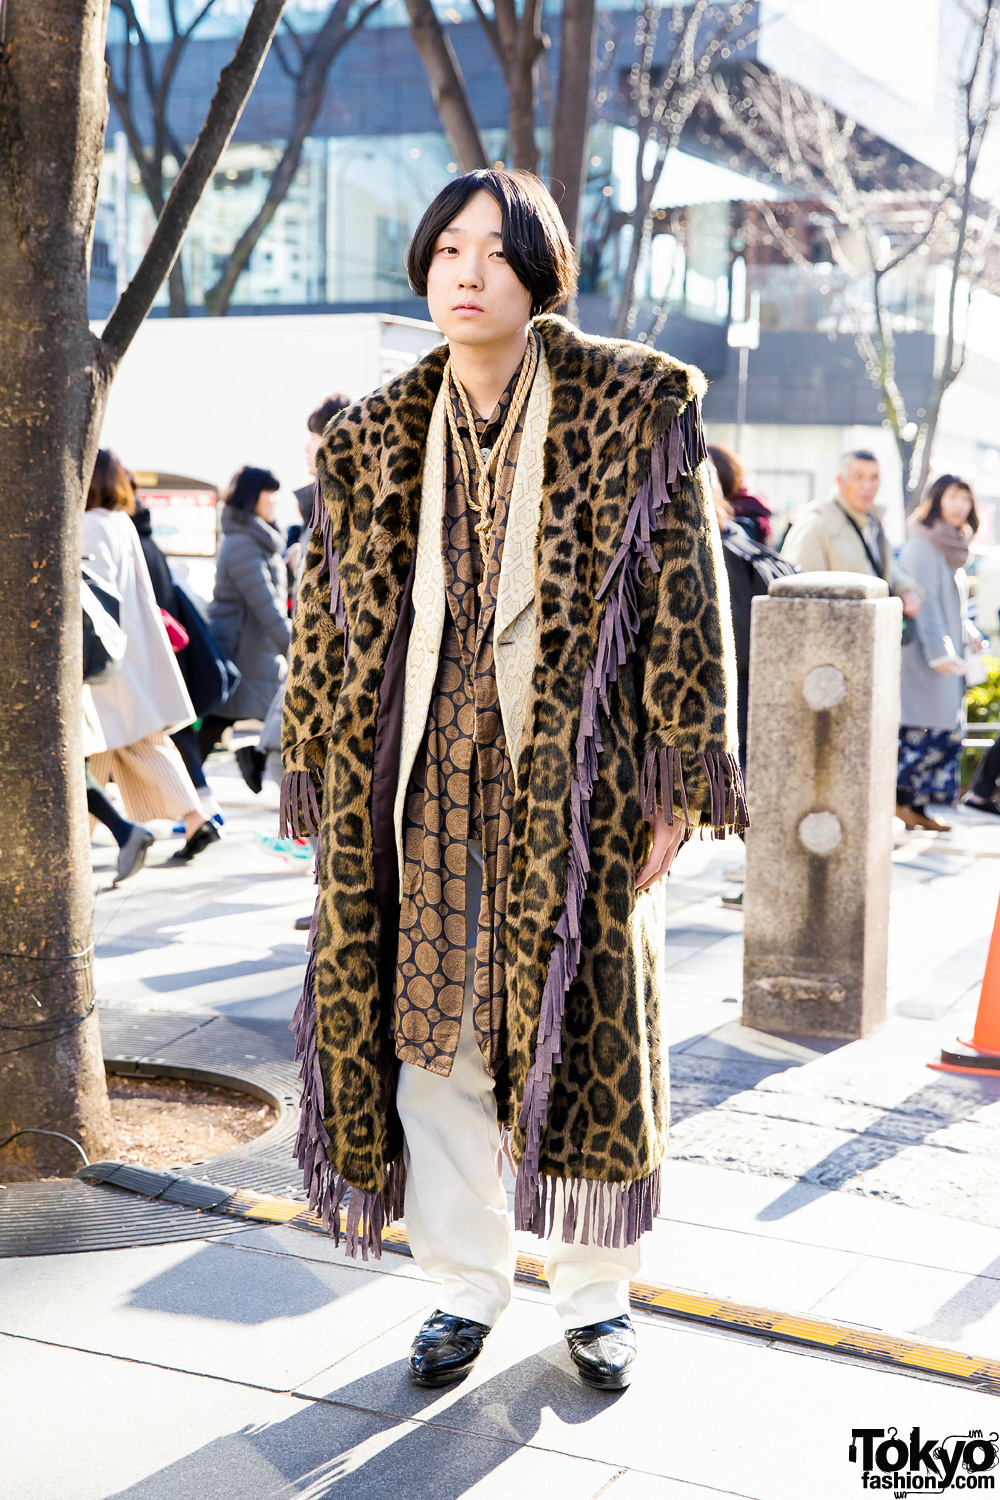 Harajuku Guy in Luxurious Street Style w/ Vintage Layers & Mixed Prints